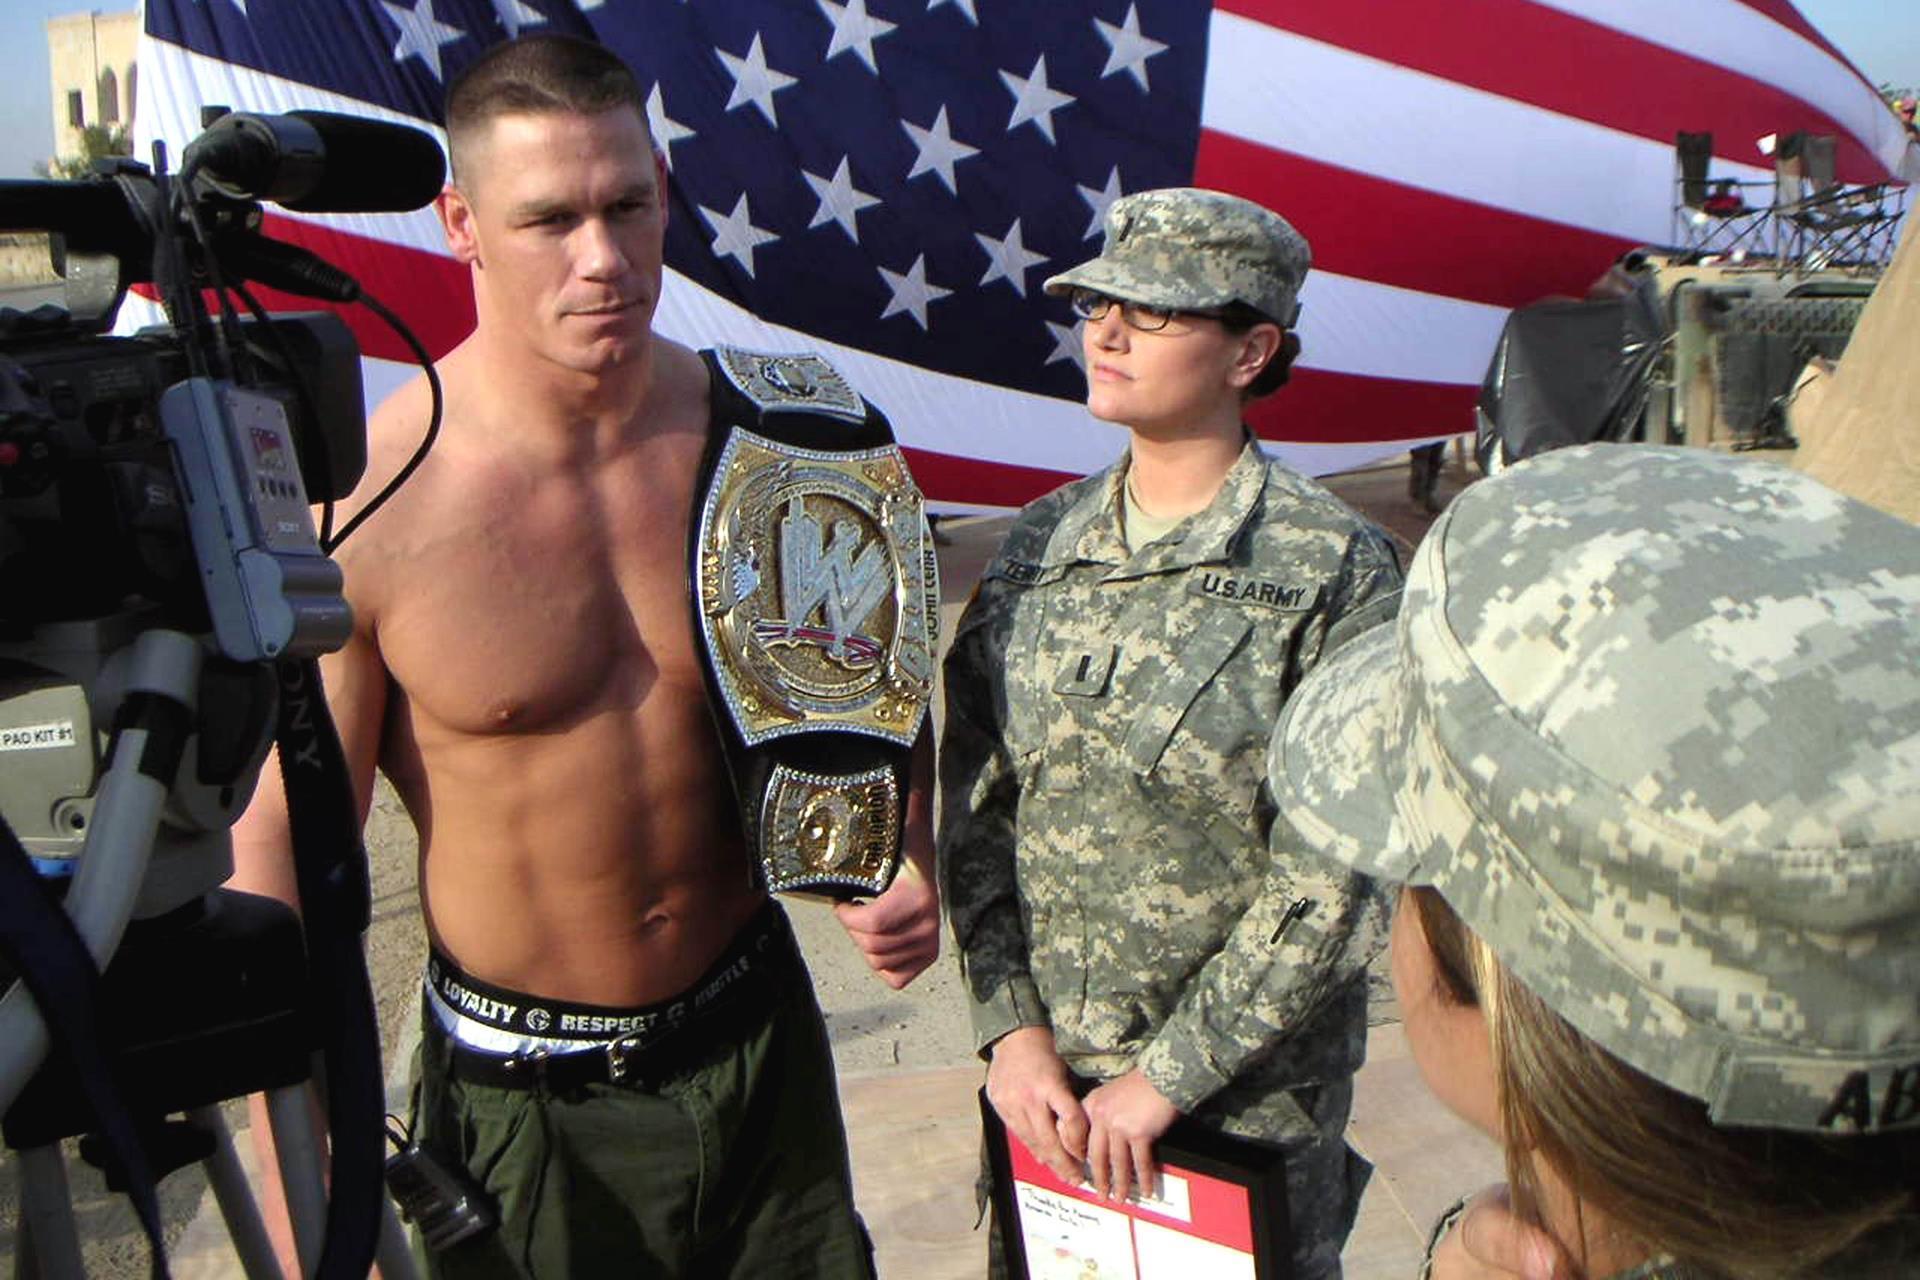 Get awesome John Cena HD images in each new Chrome tab! 